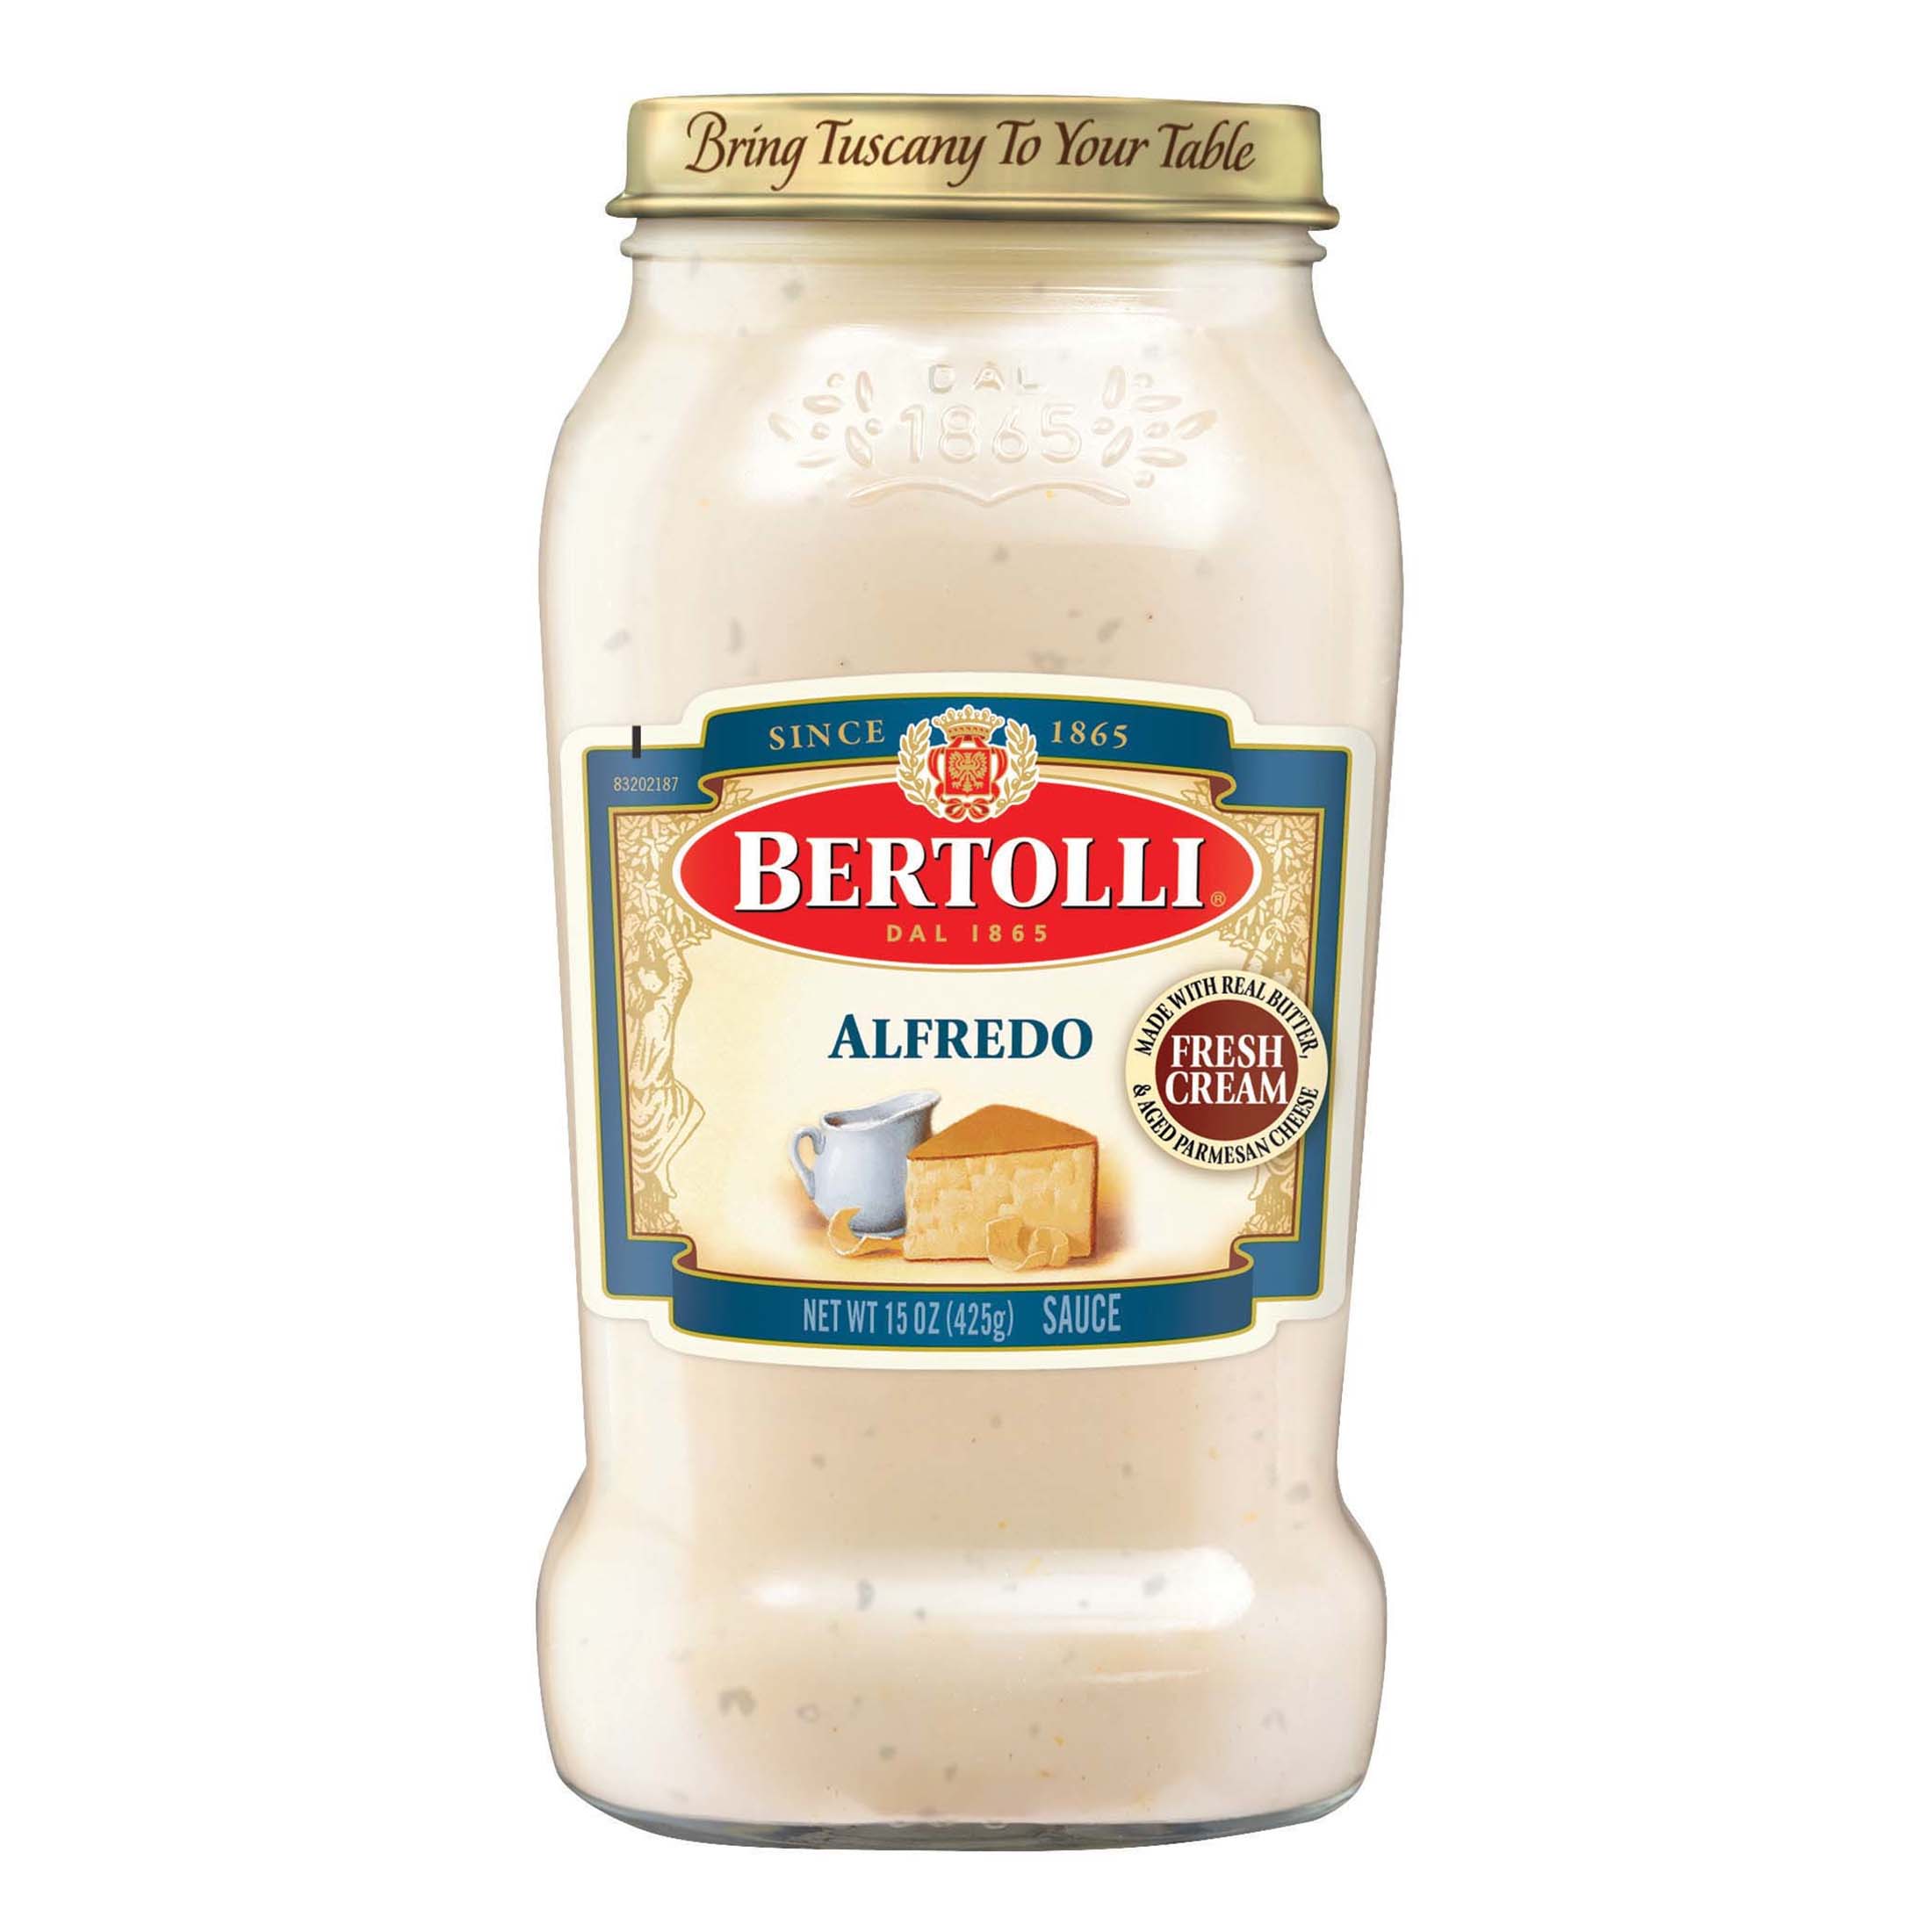 Bertolli Alfredo Pasta Sauce with Aged Parmesan Cheese, Made with Fresh Cream and Real Butter, 15 oz - image 1 of 8